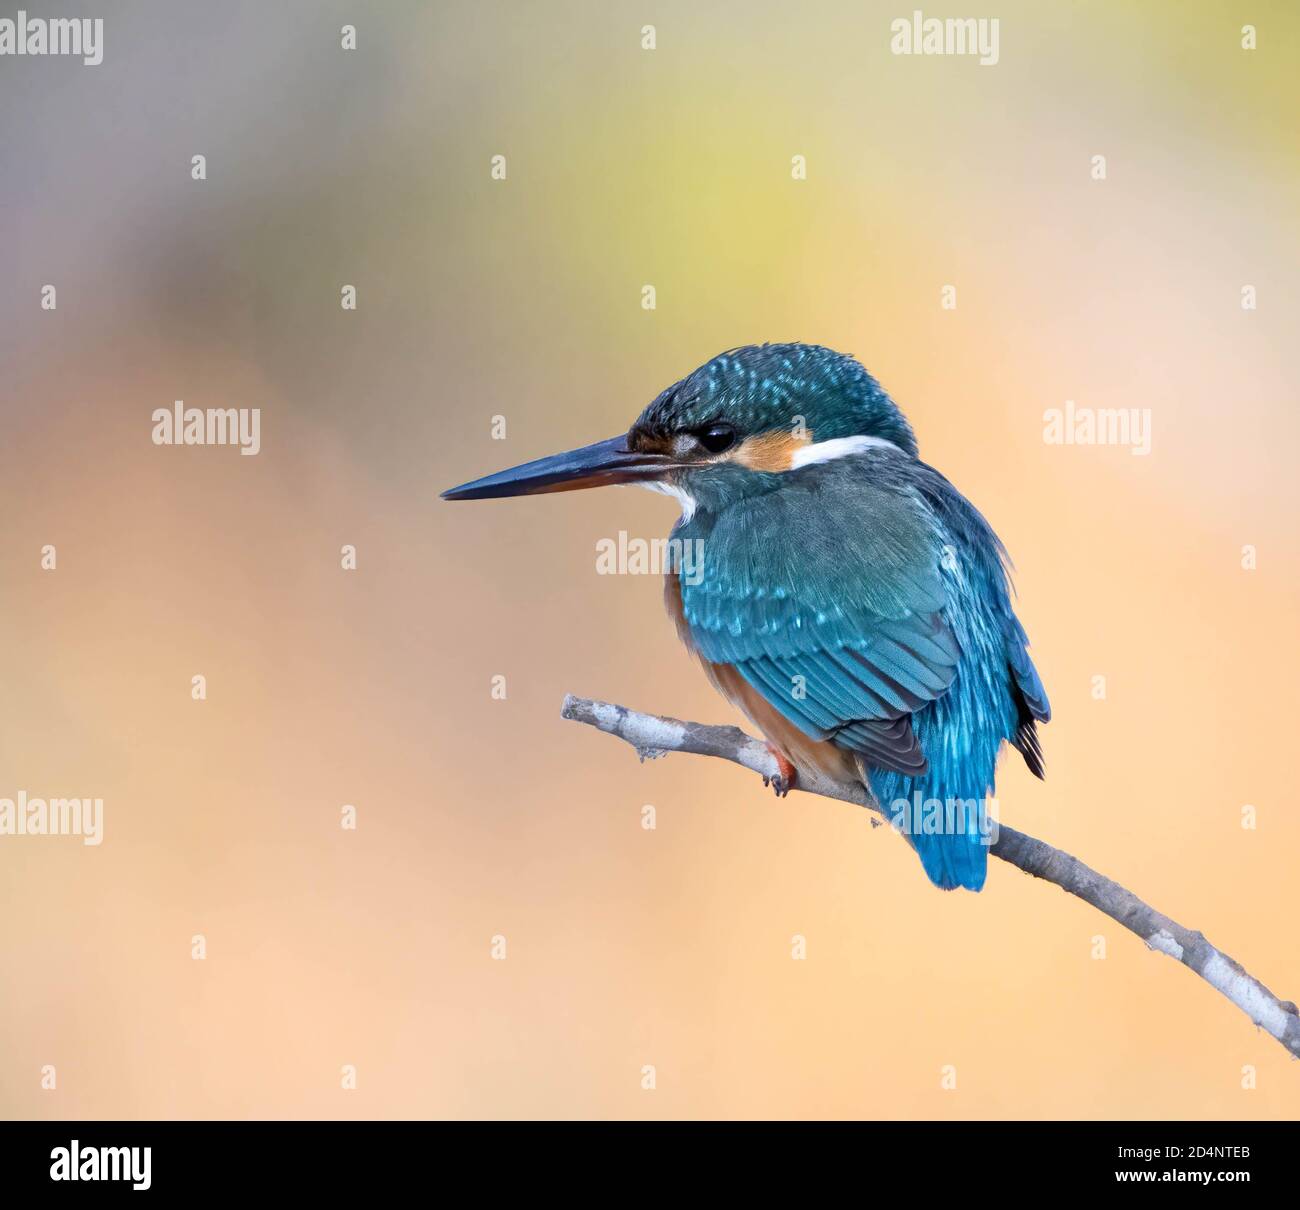 Tiny colorful bird, Common Kingfisher, is perching on a thin branch, looking to the side Stock Photo